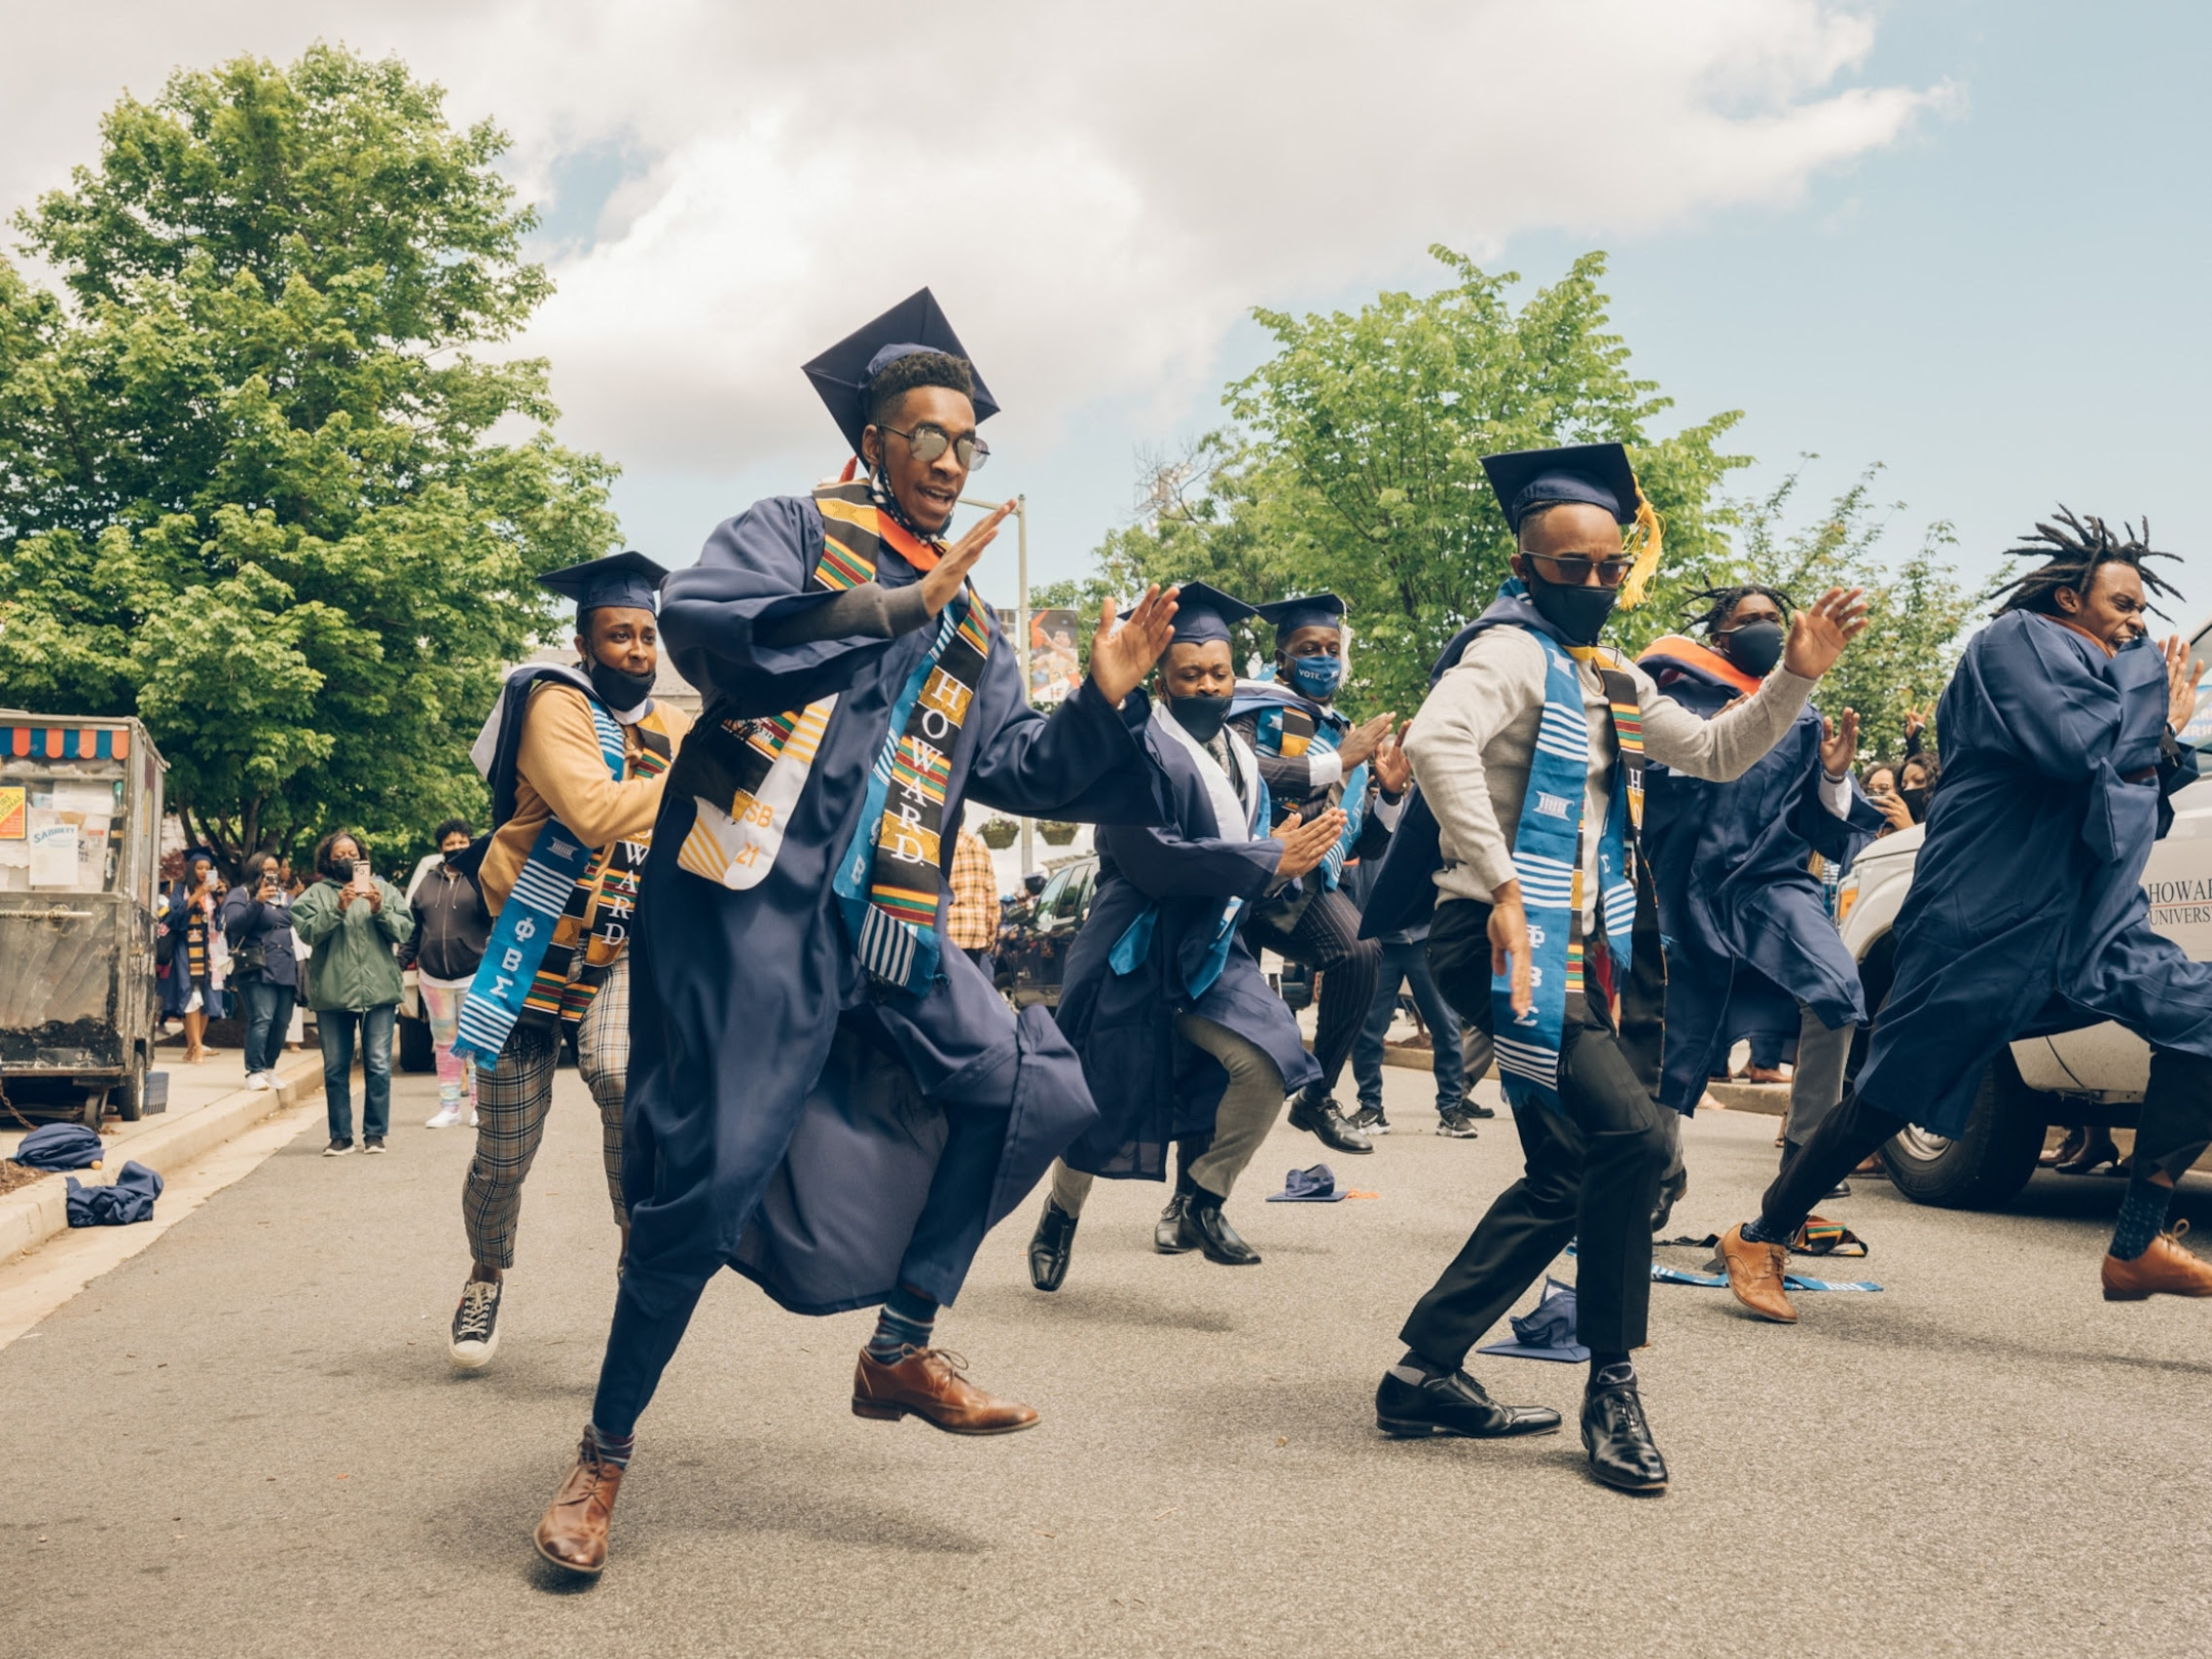 recent graduates from Howard University dance in the streets in Washington DC